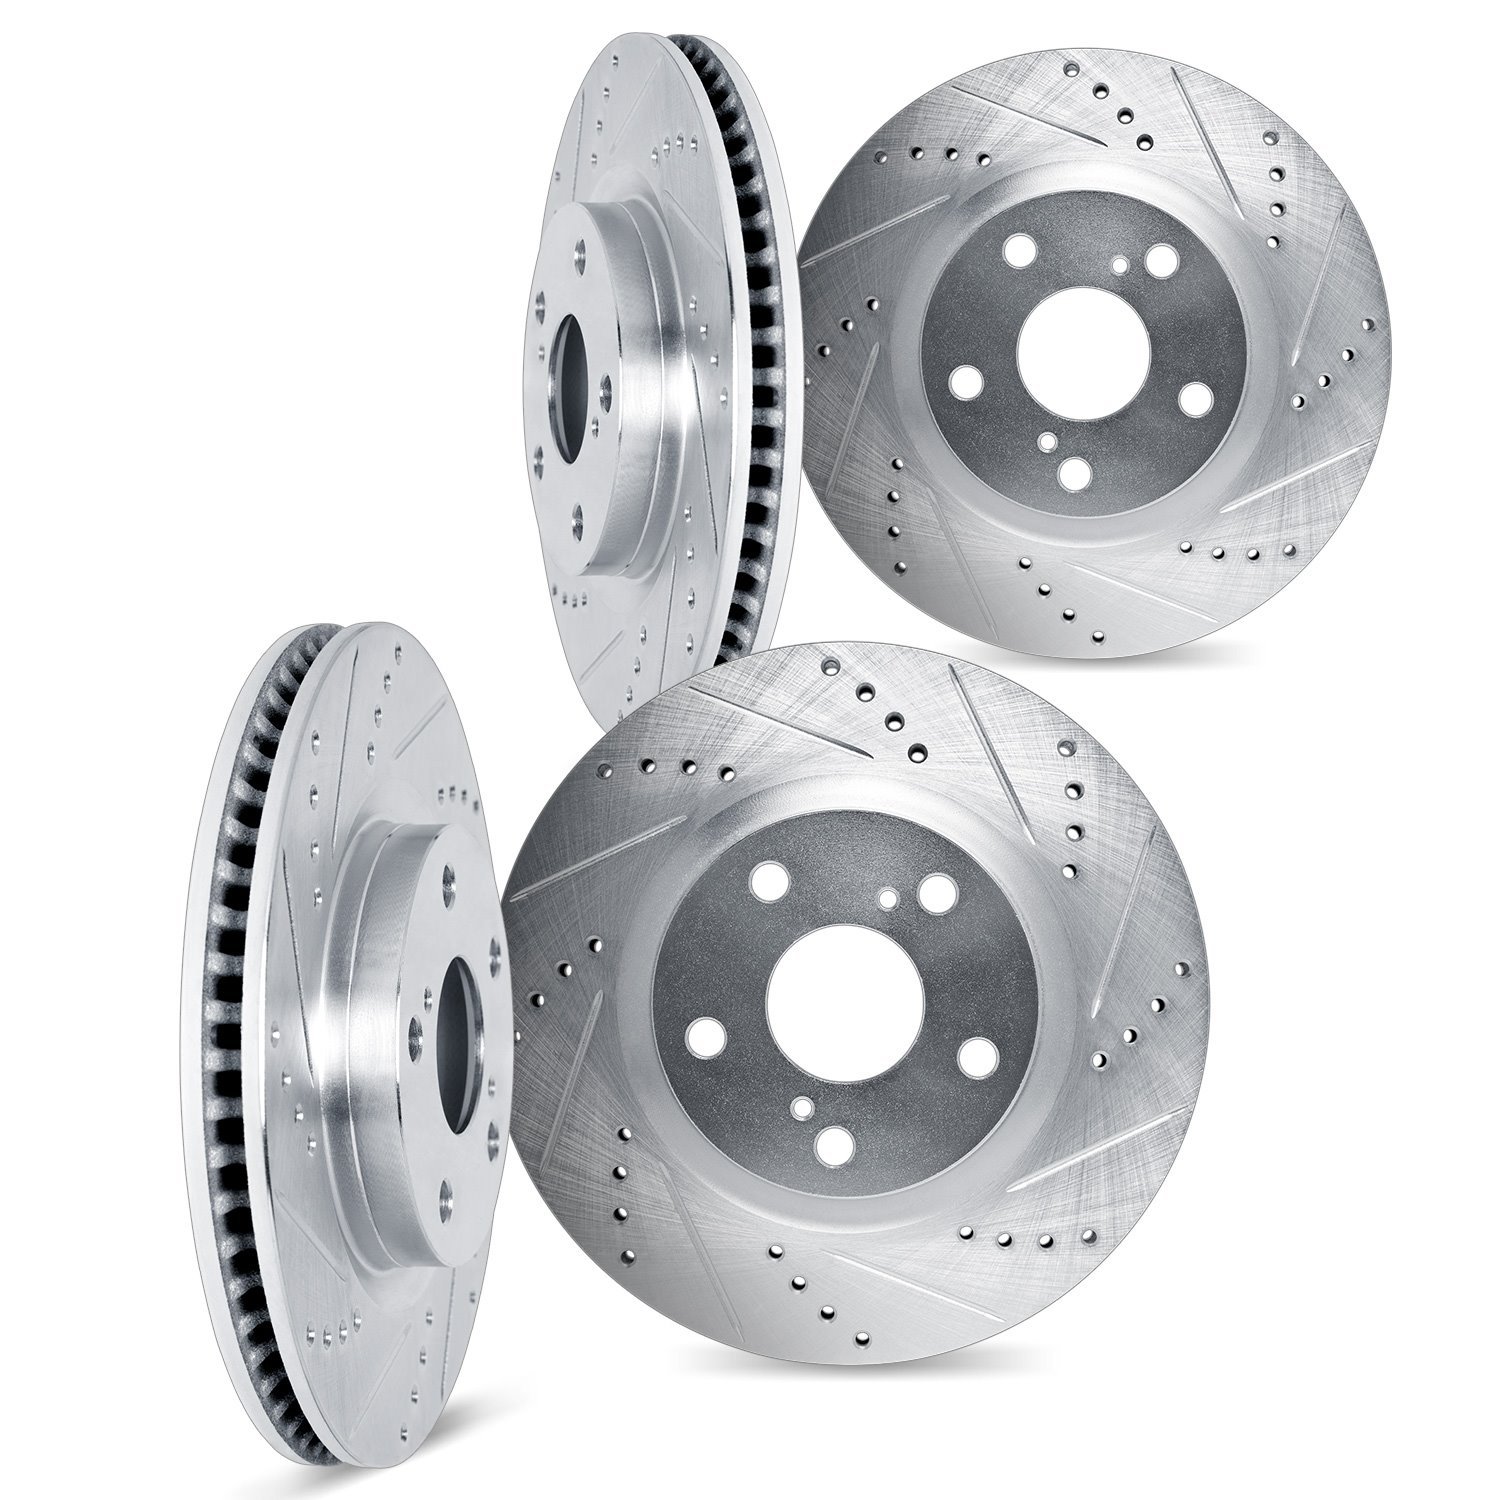 7004-68004 Drilled/Slotted Brake Rotors [Silver], 1993-1997 Infiniti/Nissan, Position: Front and Rear